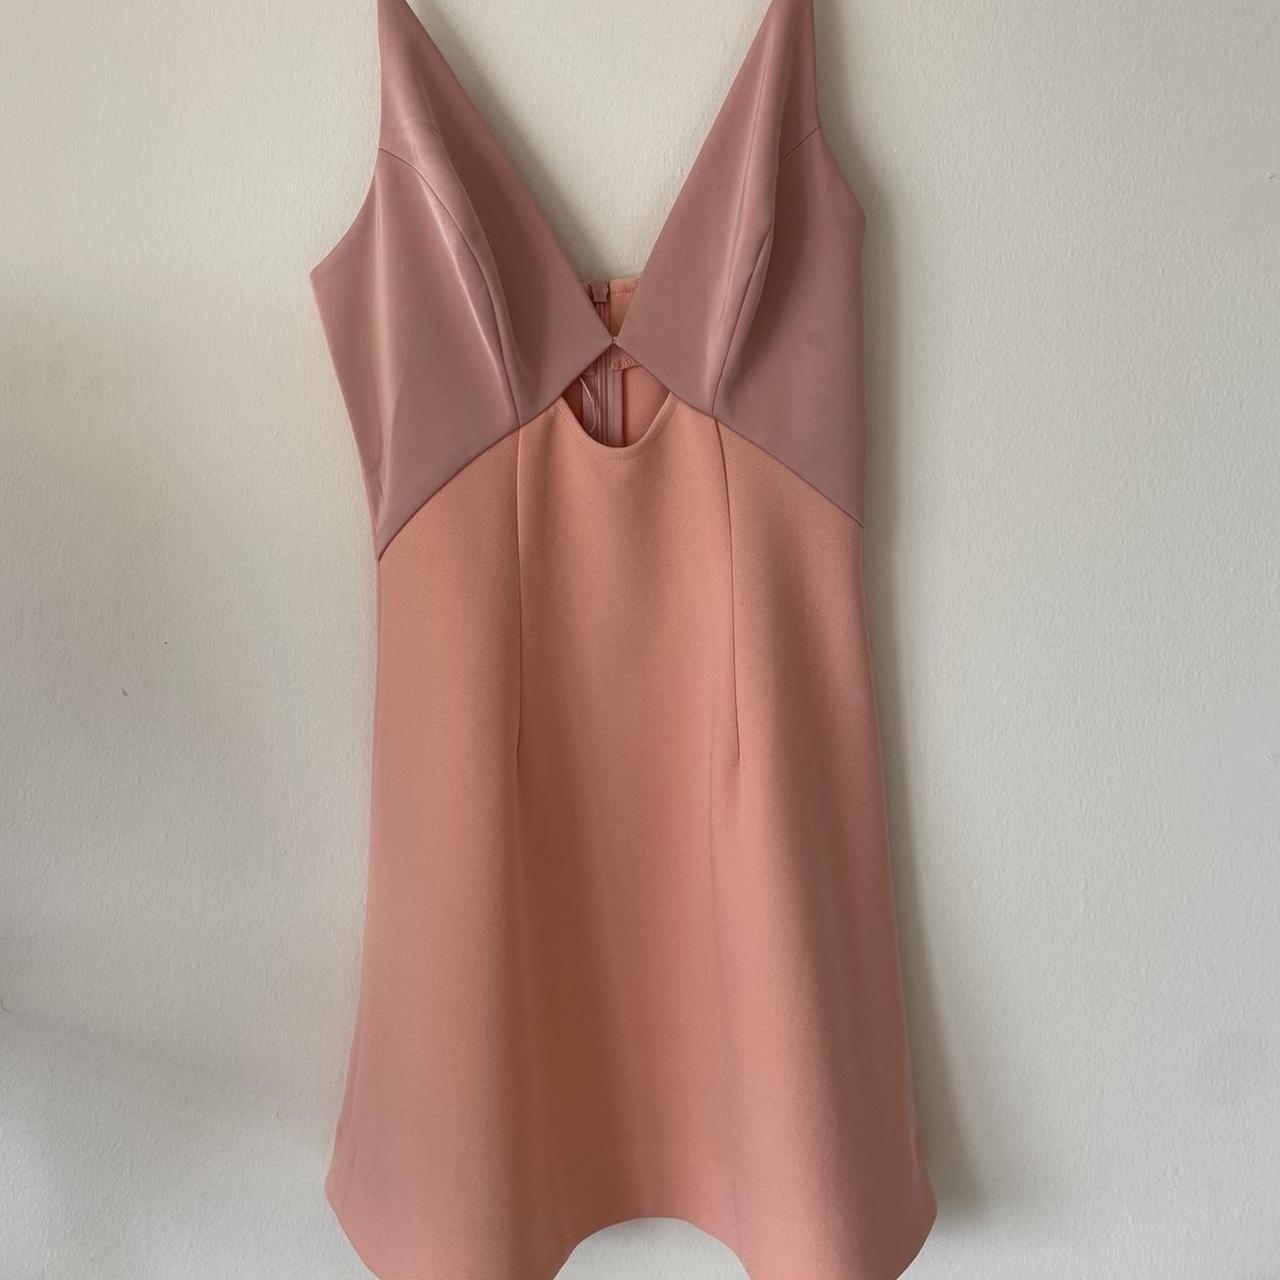 Finders Keepers Women's Pink Dress